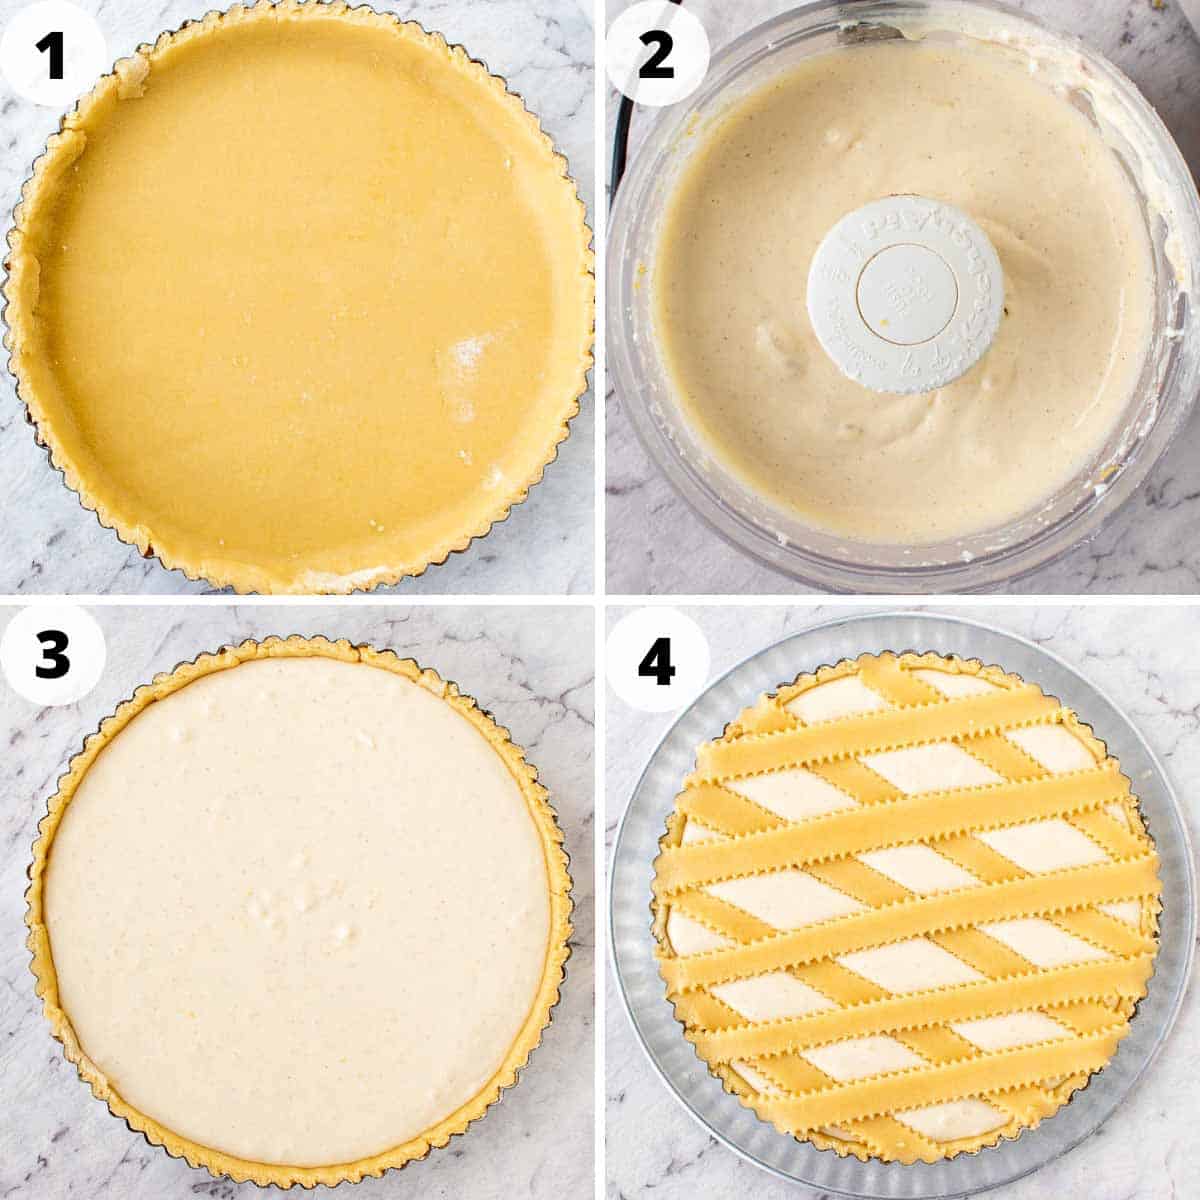 A four step process to making the filling and finishing this recipe.